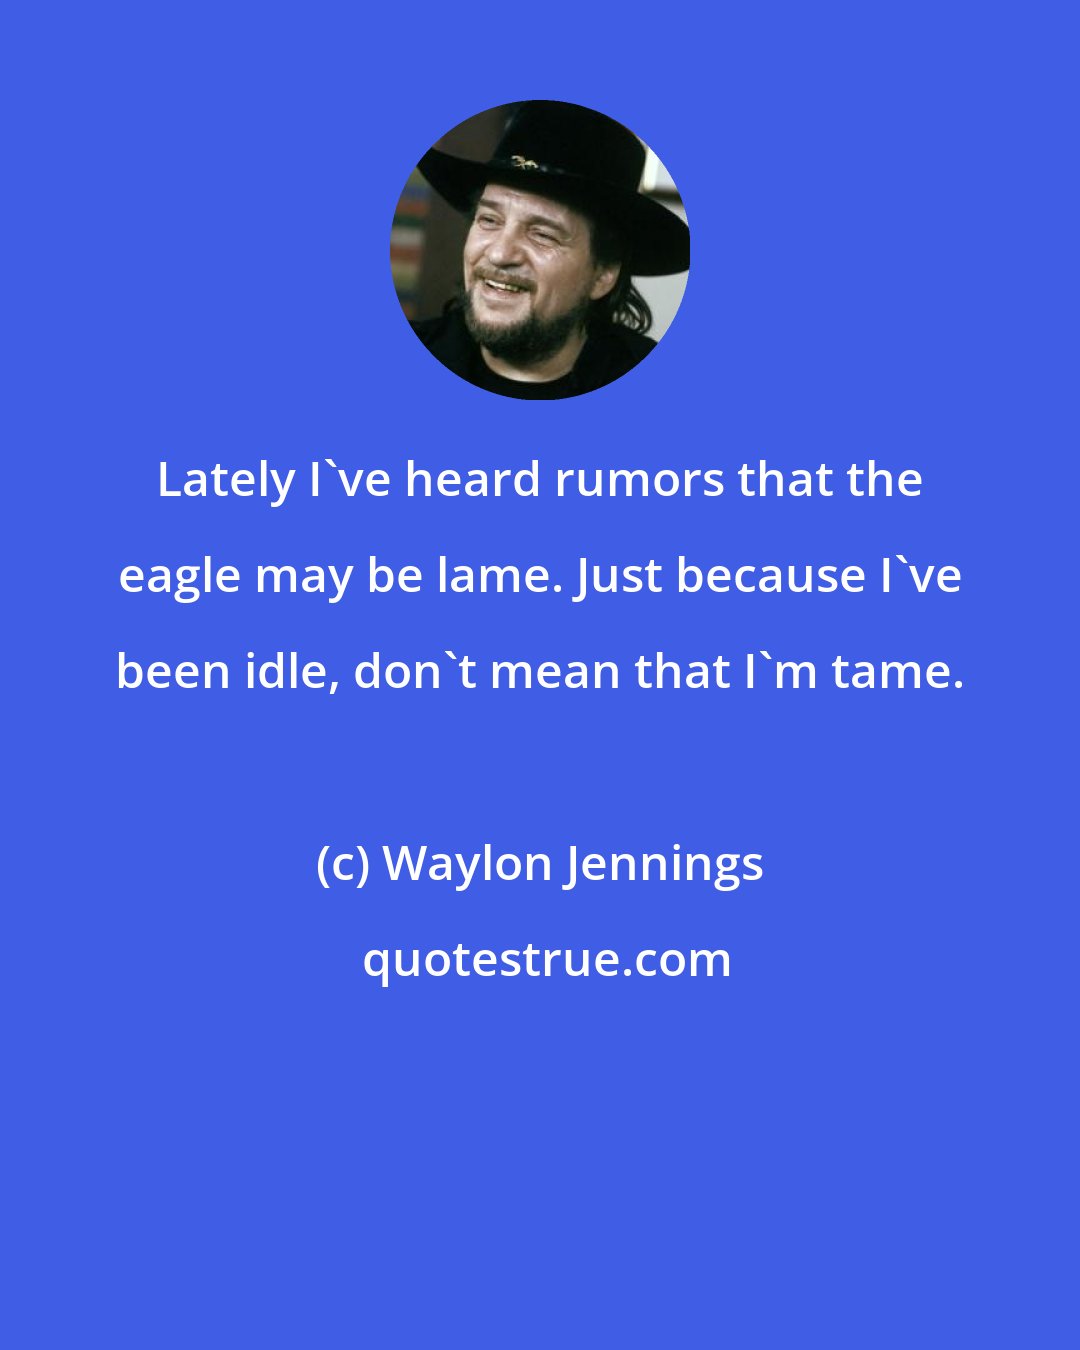 Waylon Jennings: Lately I've heard rumors that the eagle may be lame. Just because I've been idle, don't mean that I'm tame.